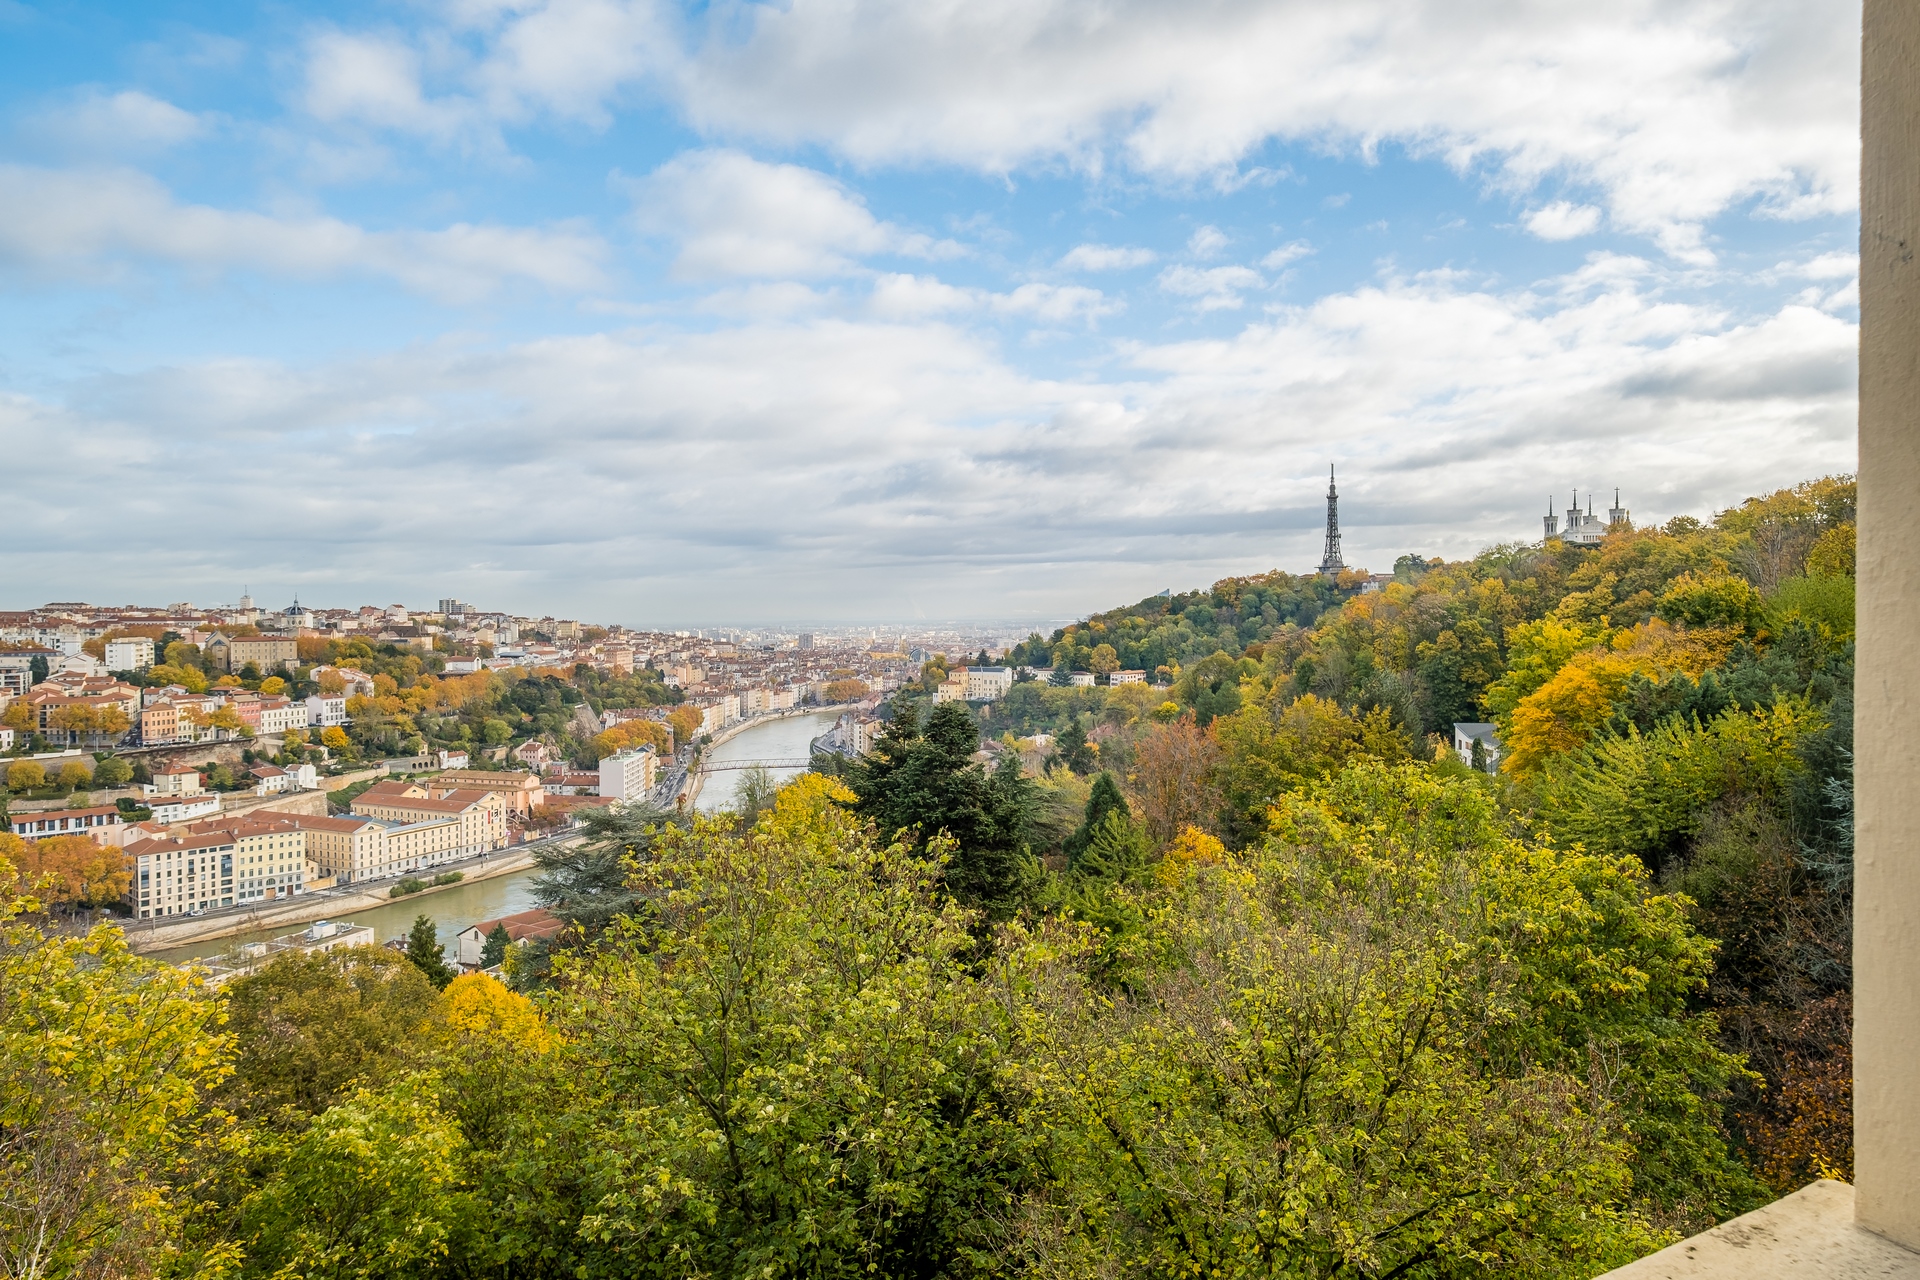 Old to renovate with a view of Fourvière